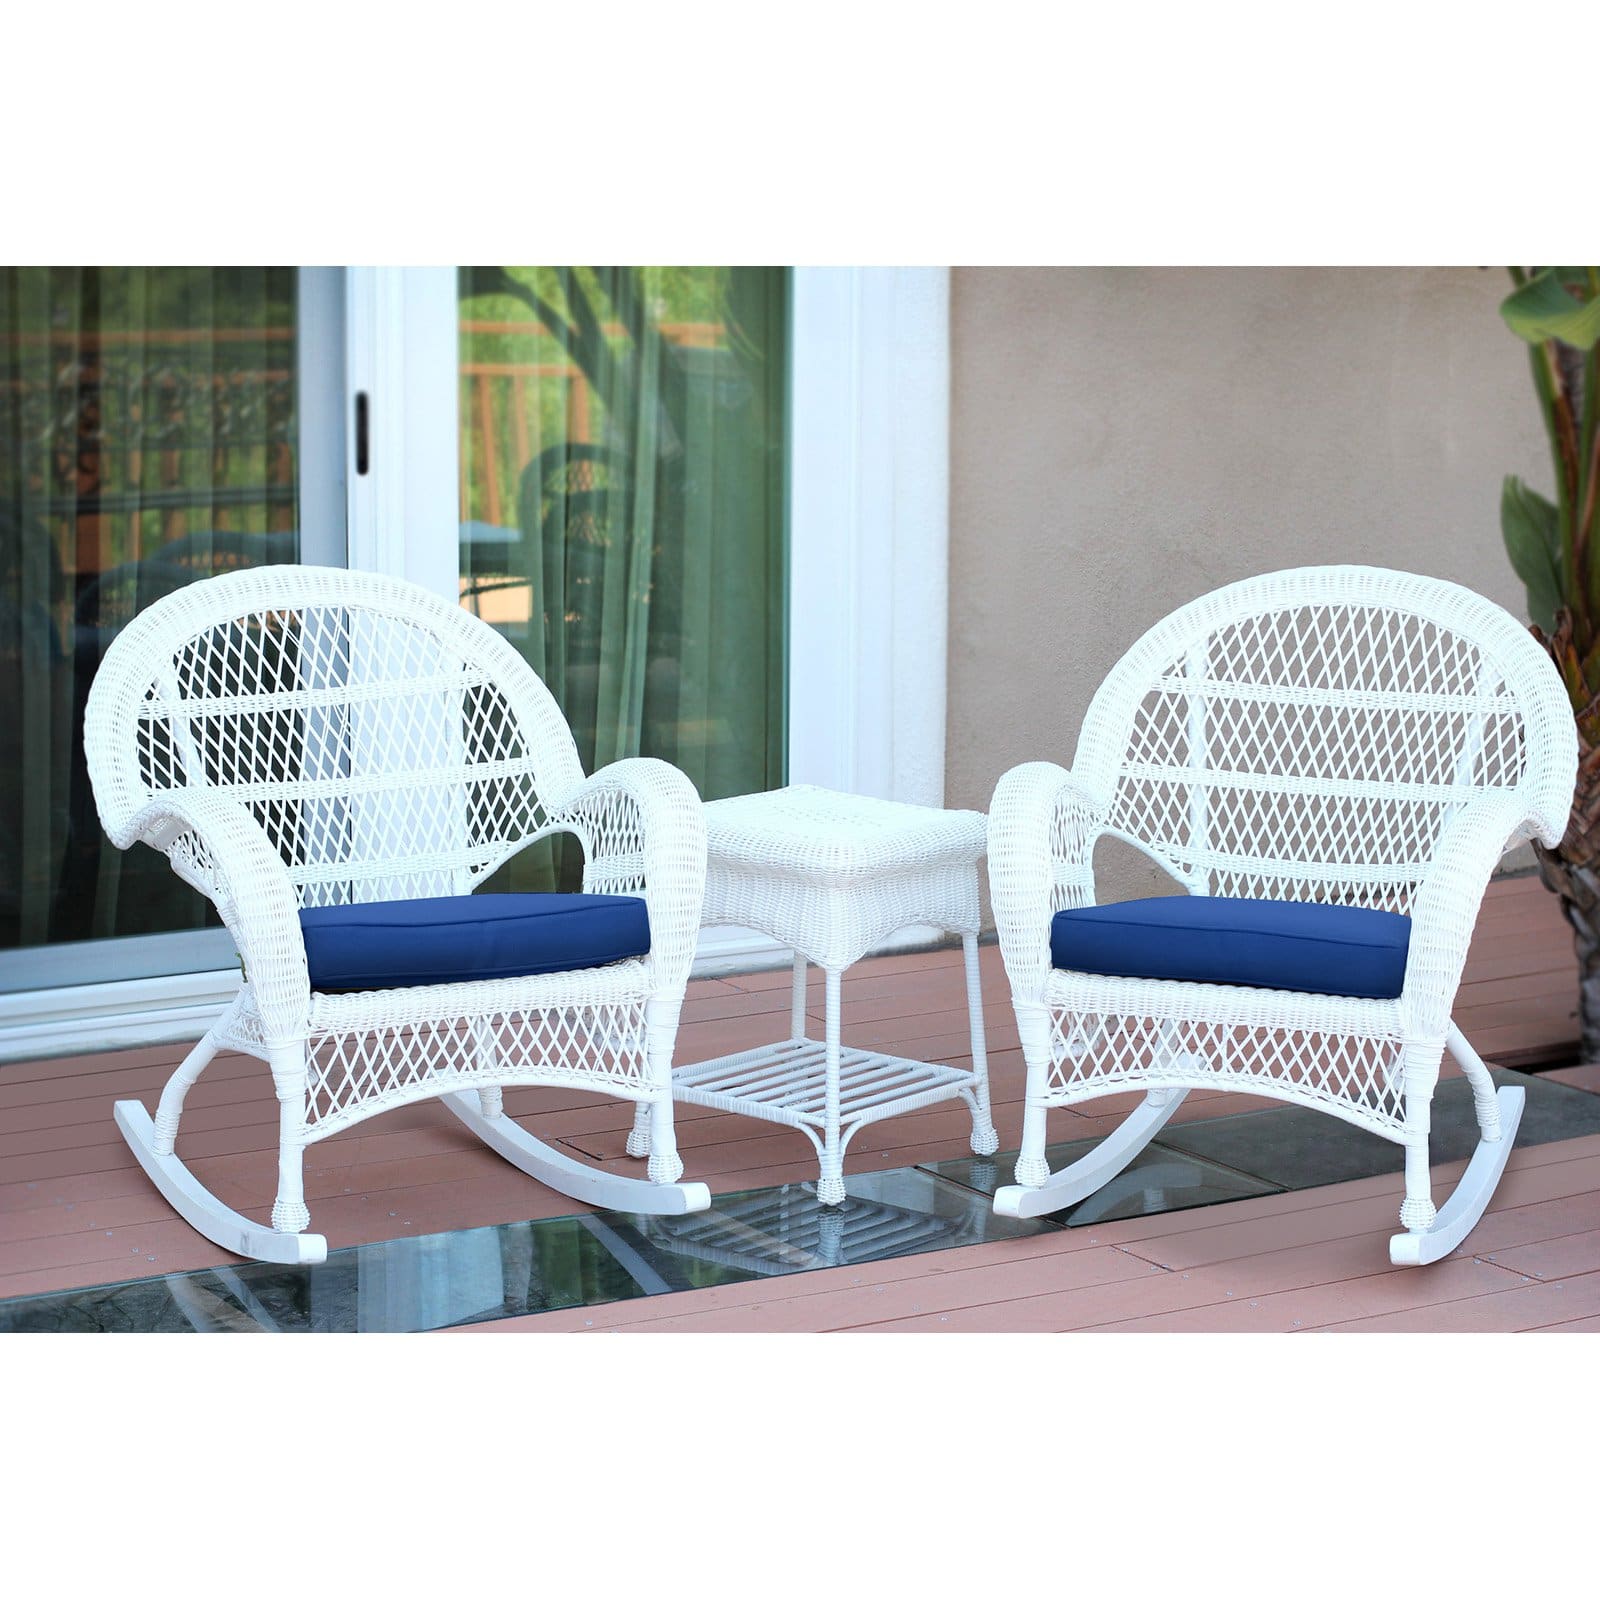 Jeco 3 Piece Wicker Conversation Set in White with Tan Cushions - image 5 of 11